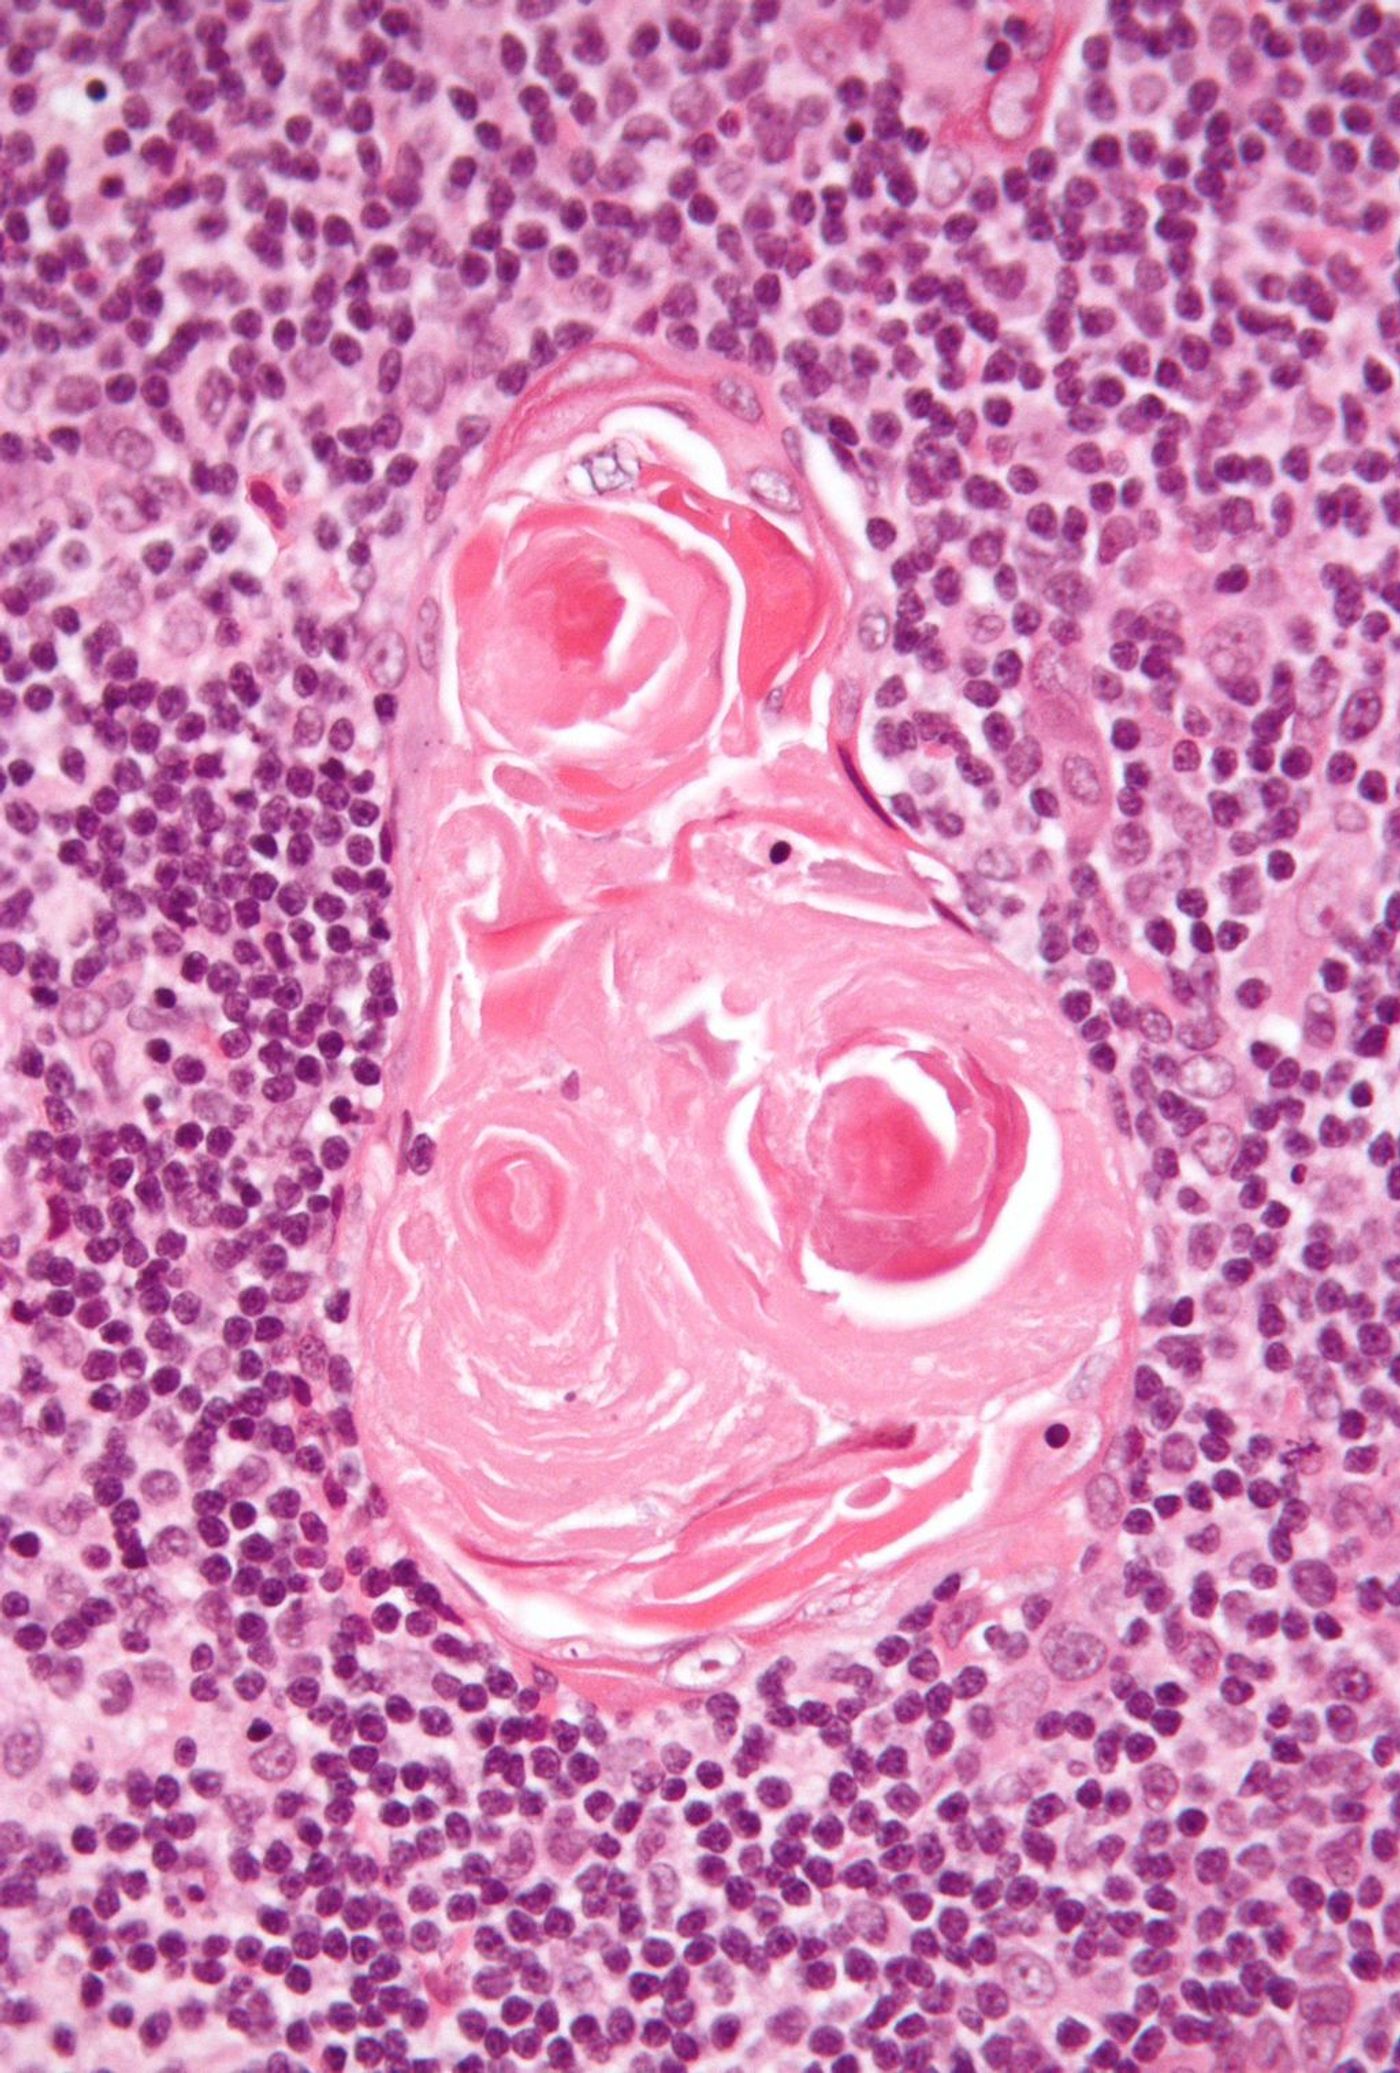 Micrograph of the thymus showing a Hassall's corpuscles. Credit: Nephron